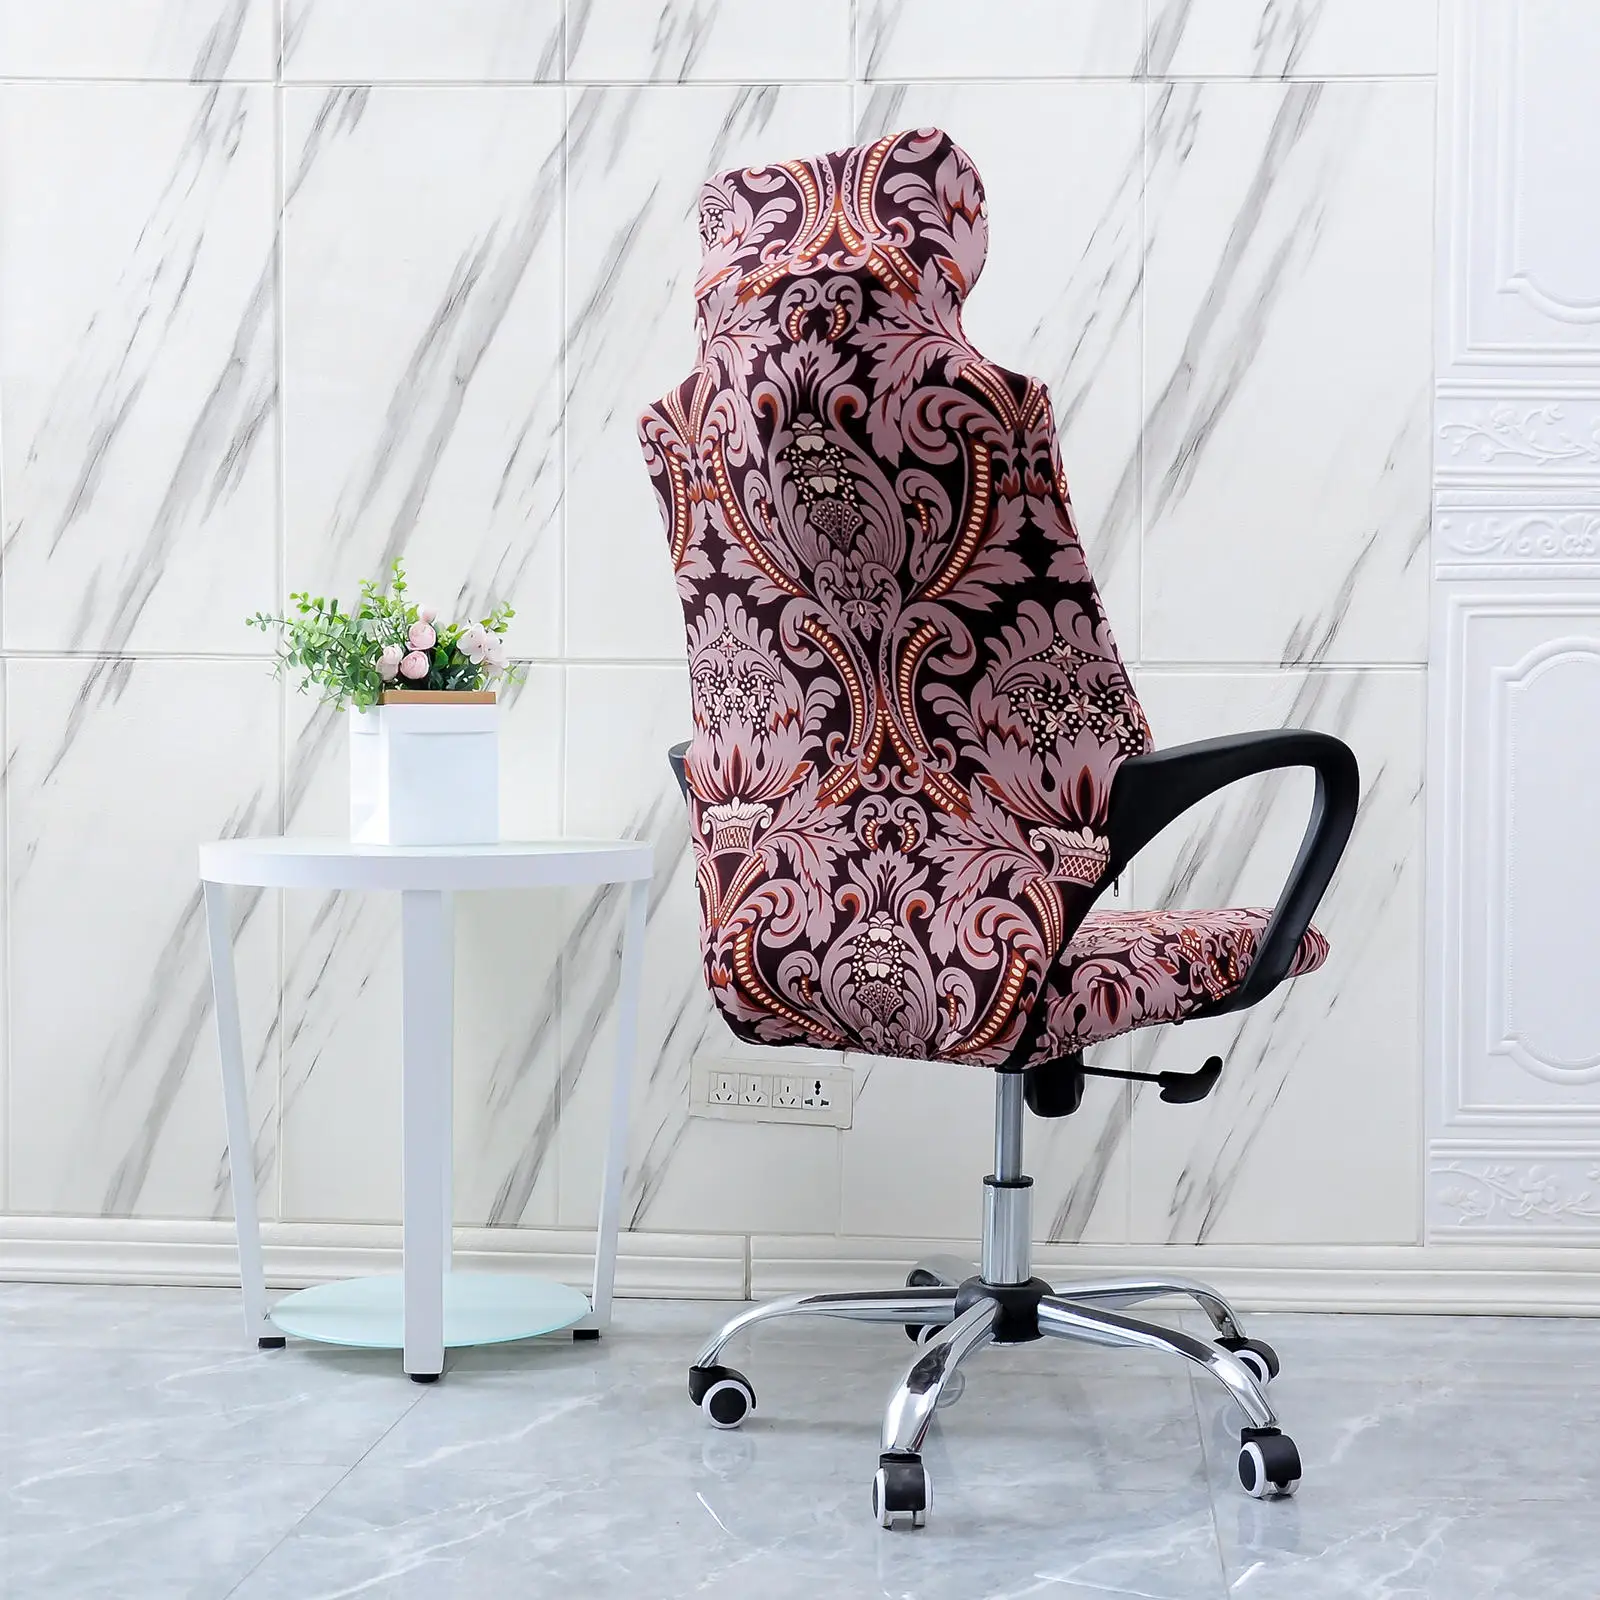 Stretchy Game Chair Cover Printed Soft Arm Rest Cover for Dinning Chair Rotating Chair